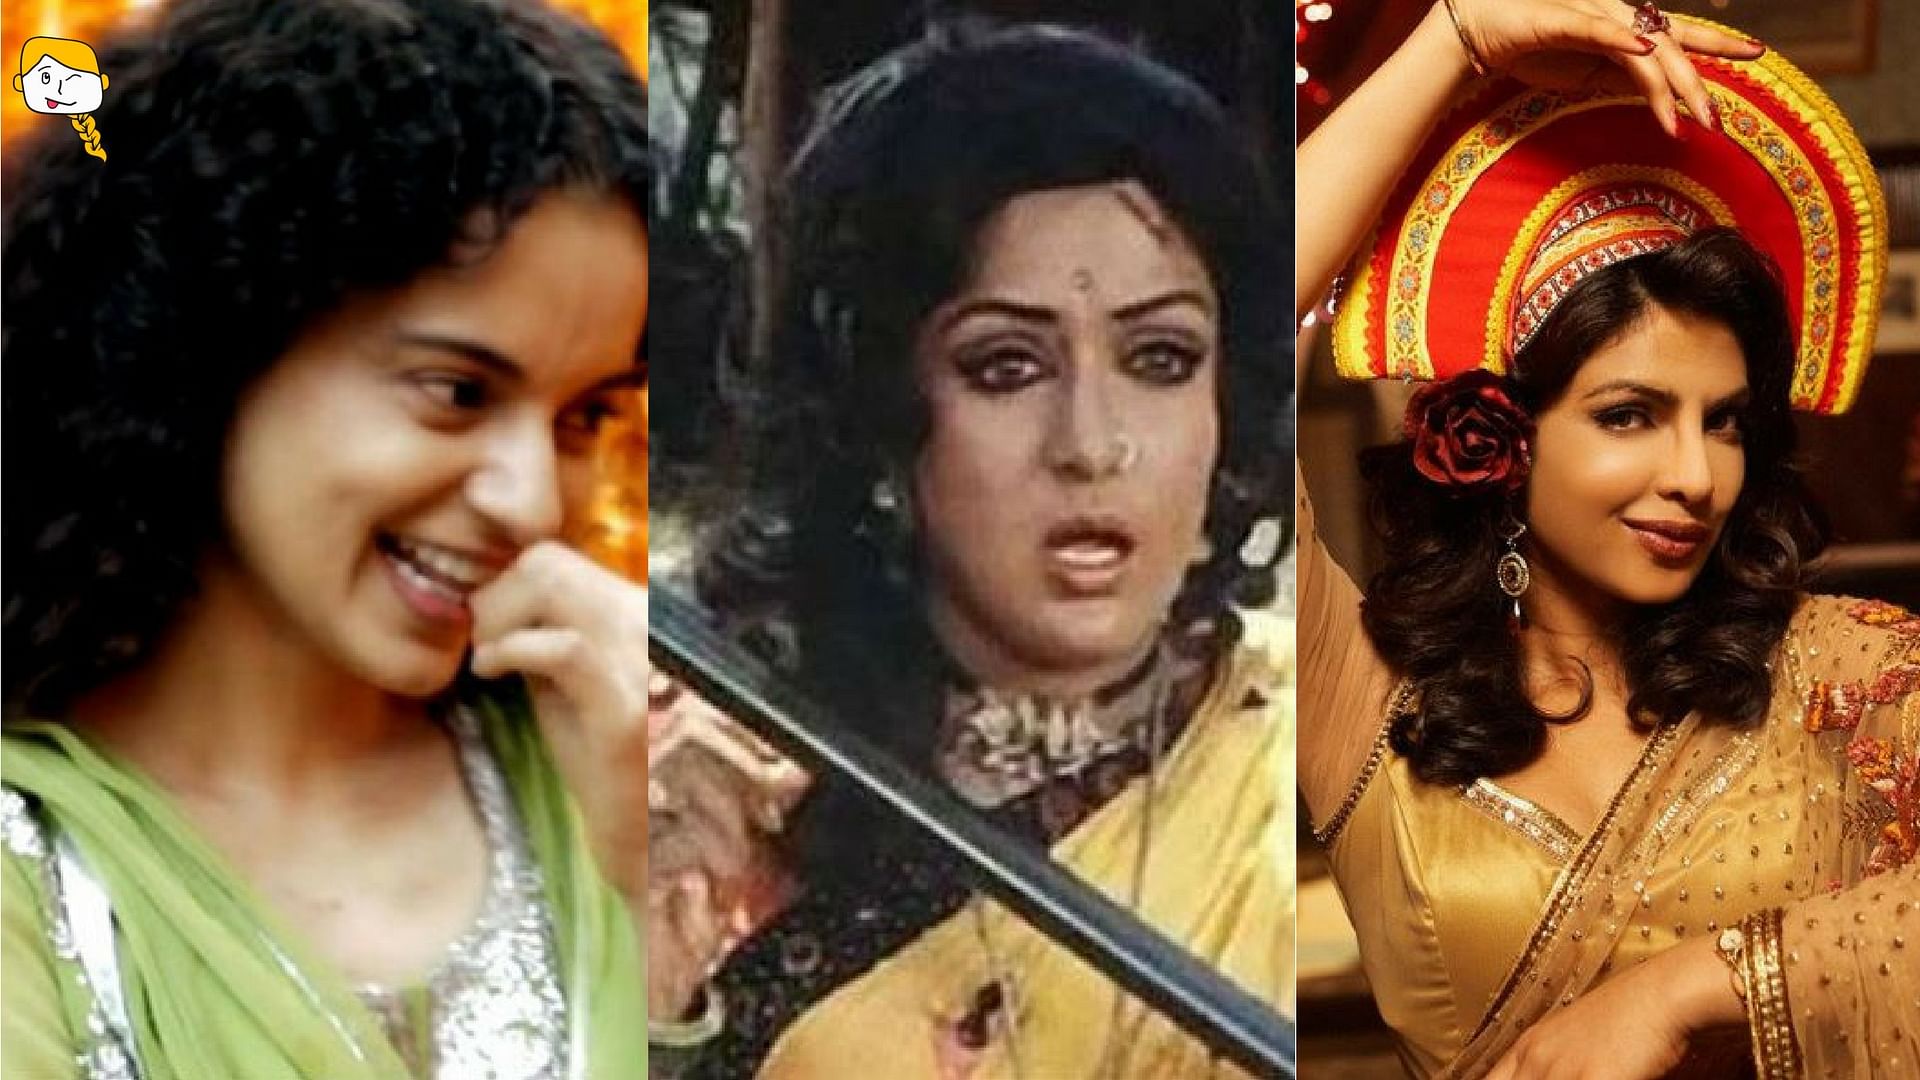 

Rani from <i>Queen</i> (left), Basanti from <i>Sholay</i> (centre) and Susanna from <i>7 Khoon Maaf</i> (right). (Photo Courtesy: Twitter/<a href="https://twitter.com/Bollywood_Divas">@Bollywood_Divas</a>/Facebook/<a href="https://www.facebook.com/Queen-Movie-1397342550536502/">Queen</a>/Altered by <b>The Quint</b>)